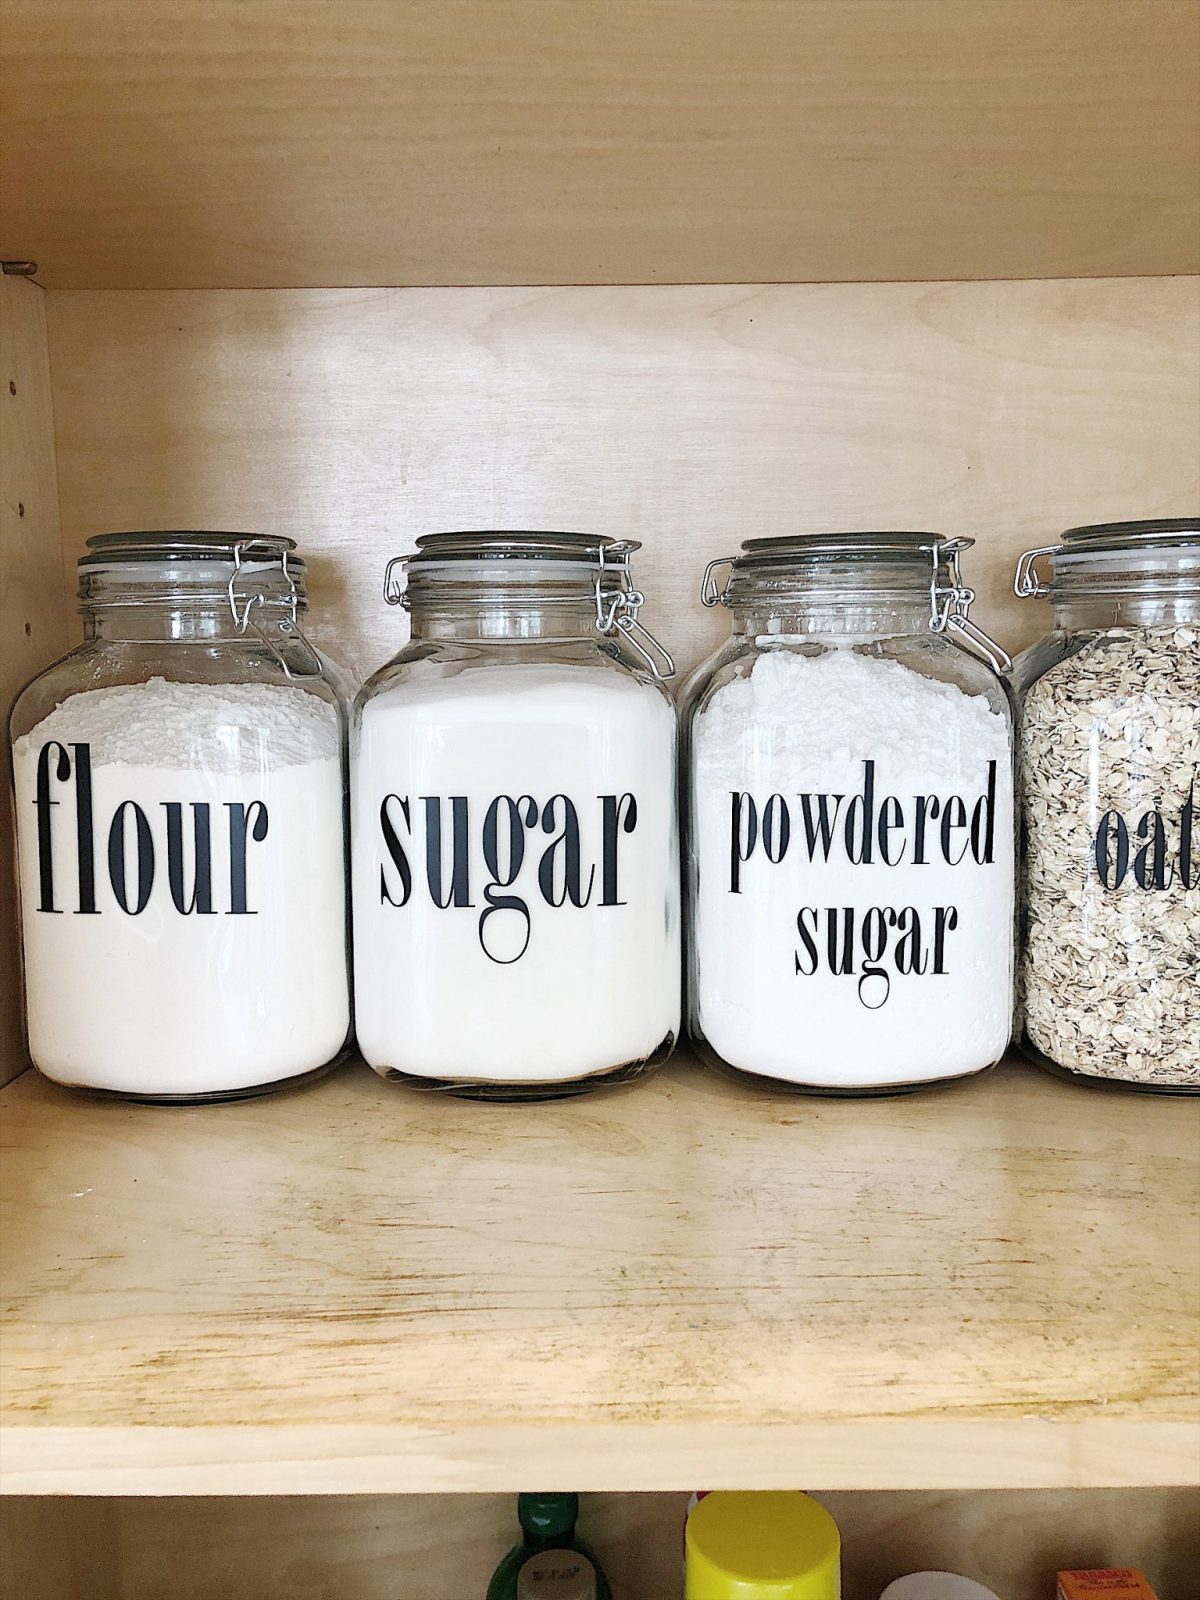 Organizing Kitchen Labels: You'll Love